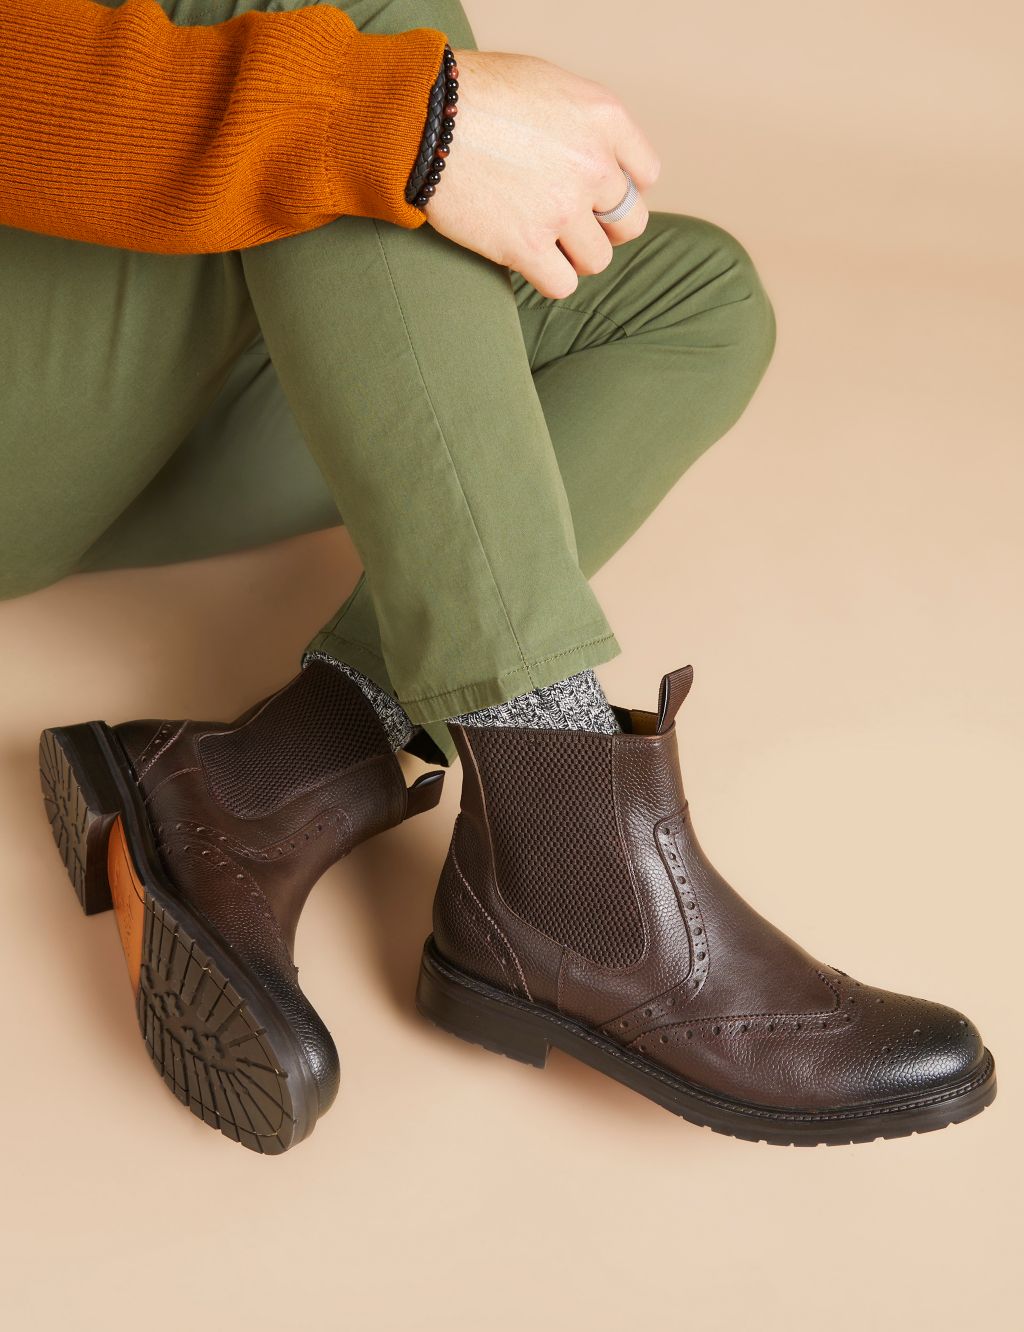 How to Style Chelsea Boots from Jones Bootmaker